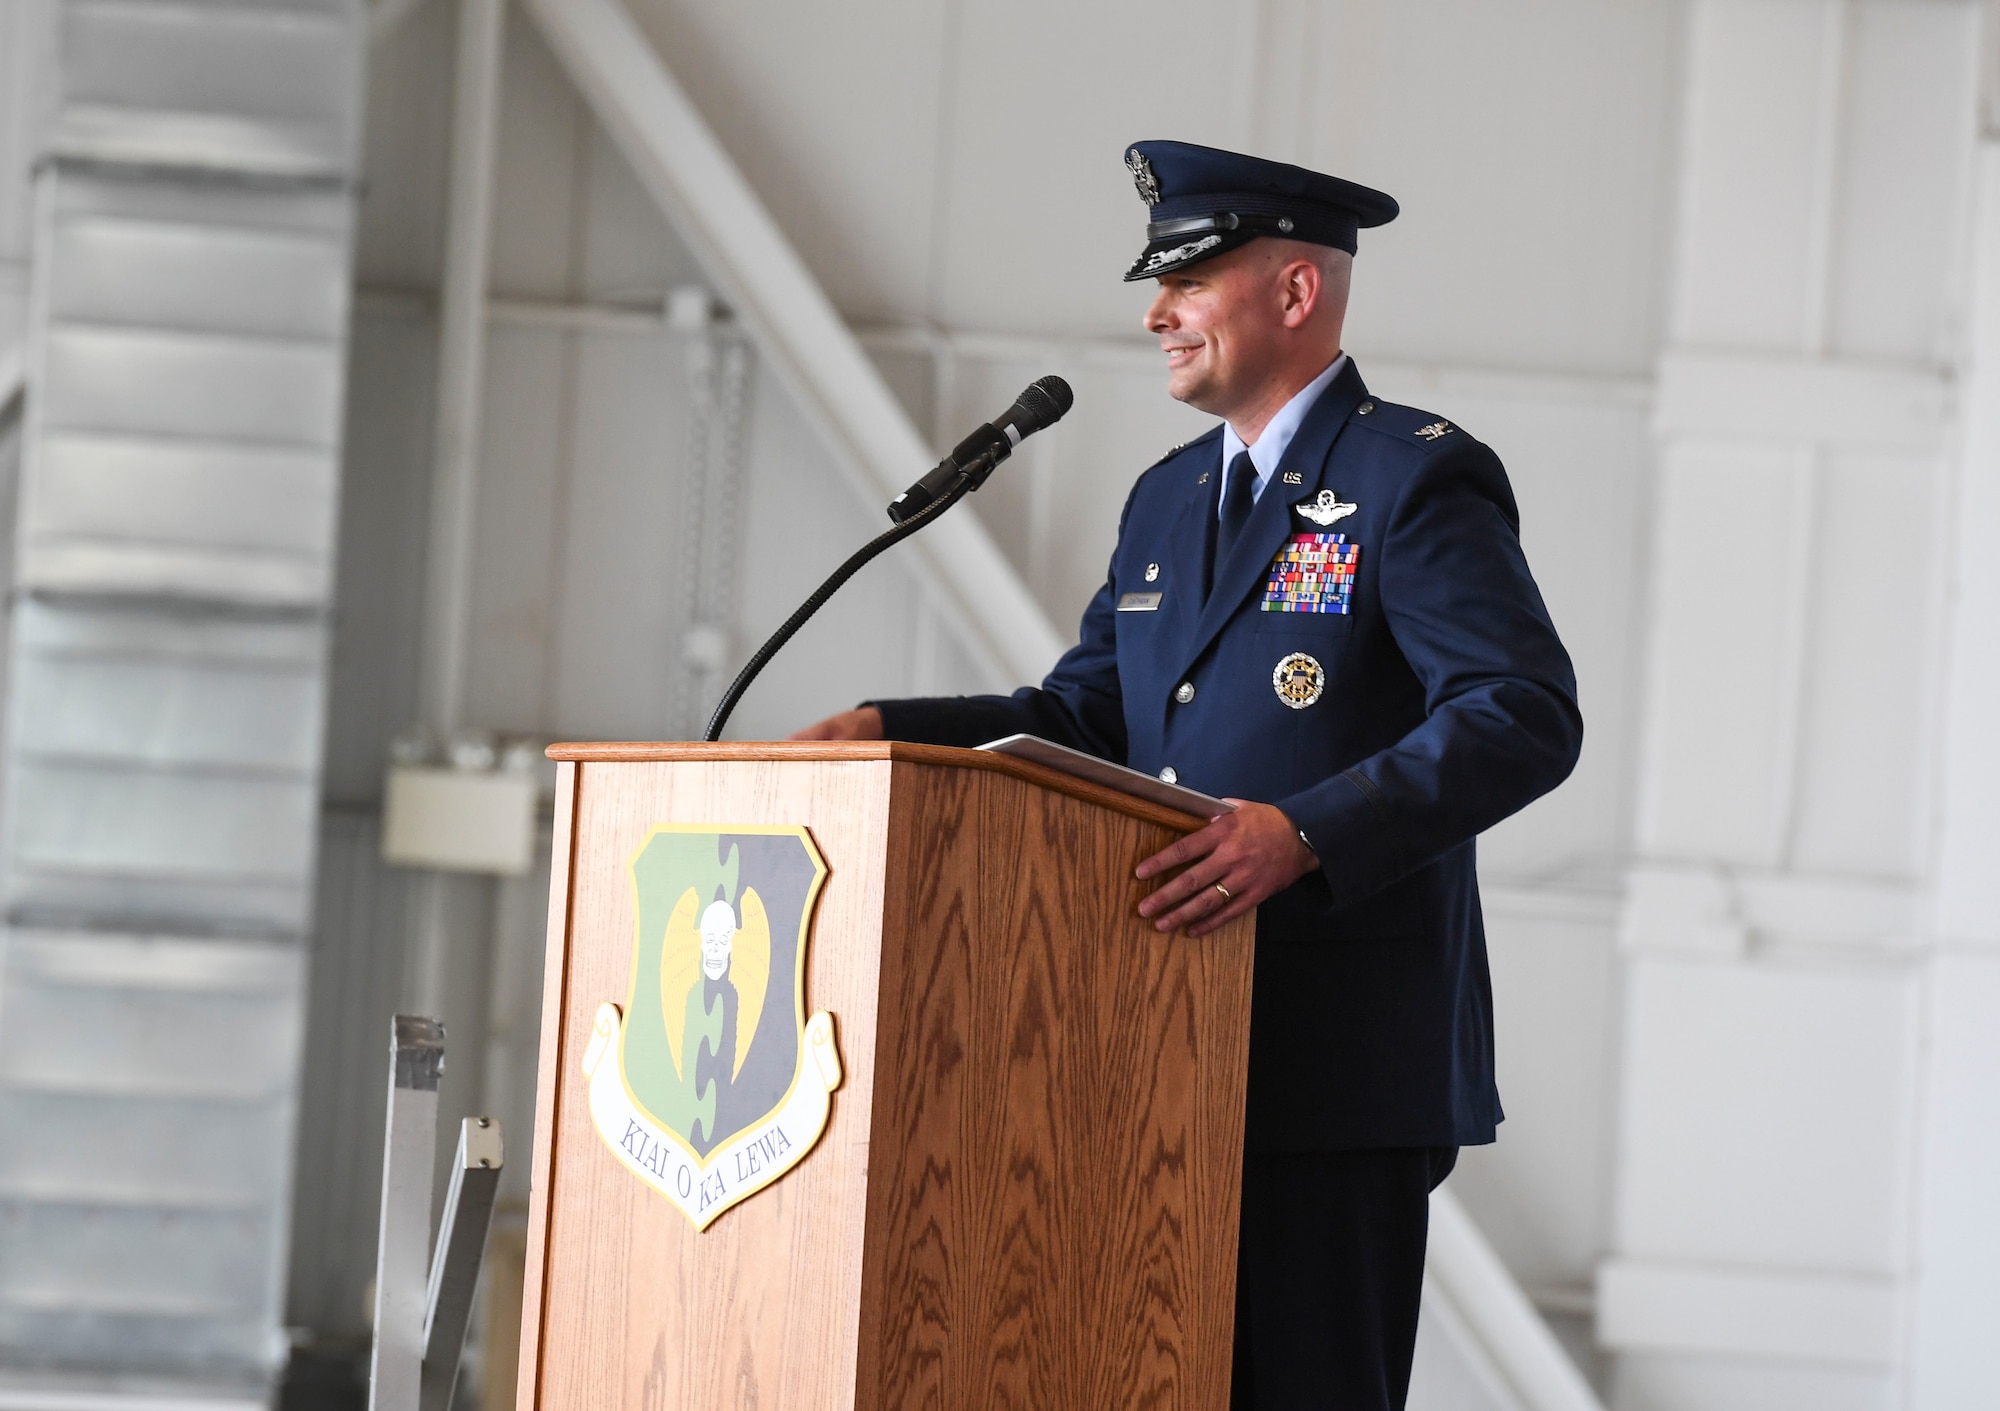 Team Minot welcomed the new 5th BW commander, Col. Bradley Cochran, at Minot Air Force Base, North Dakota, May 31, 2018.